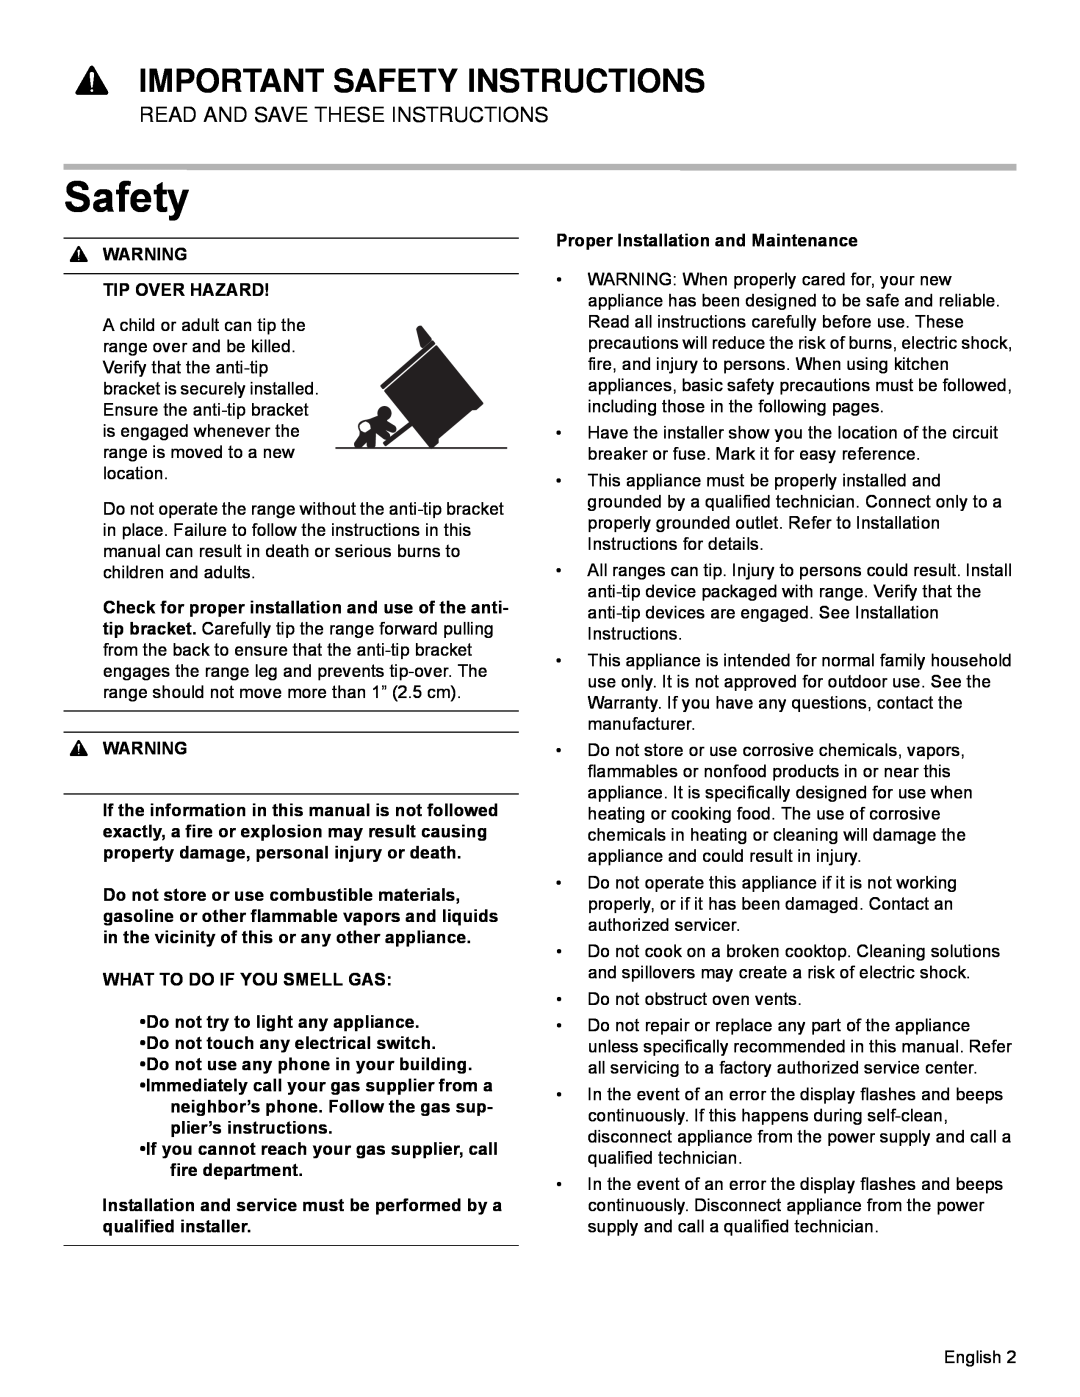 Bosch Appliances HDI8054U Important Safety Instructions, Read And Save These Instructions, Warning Tip Over Hazard 